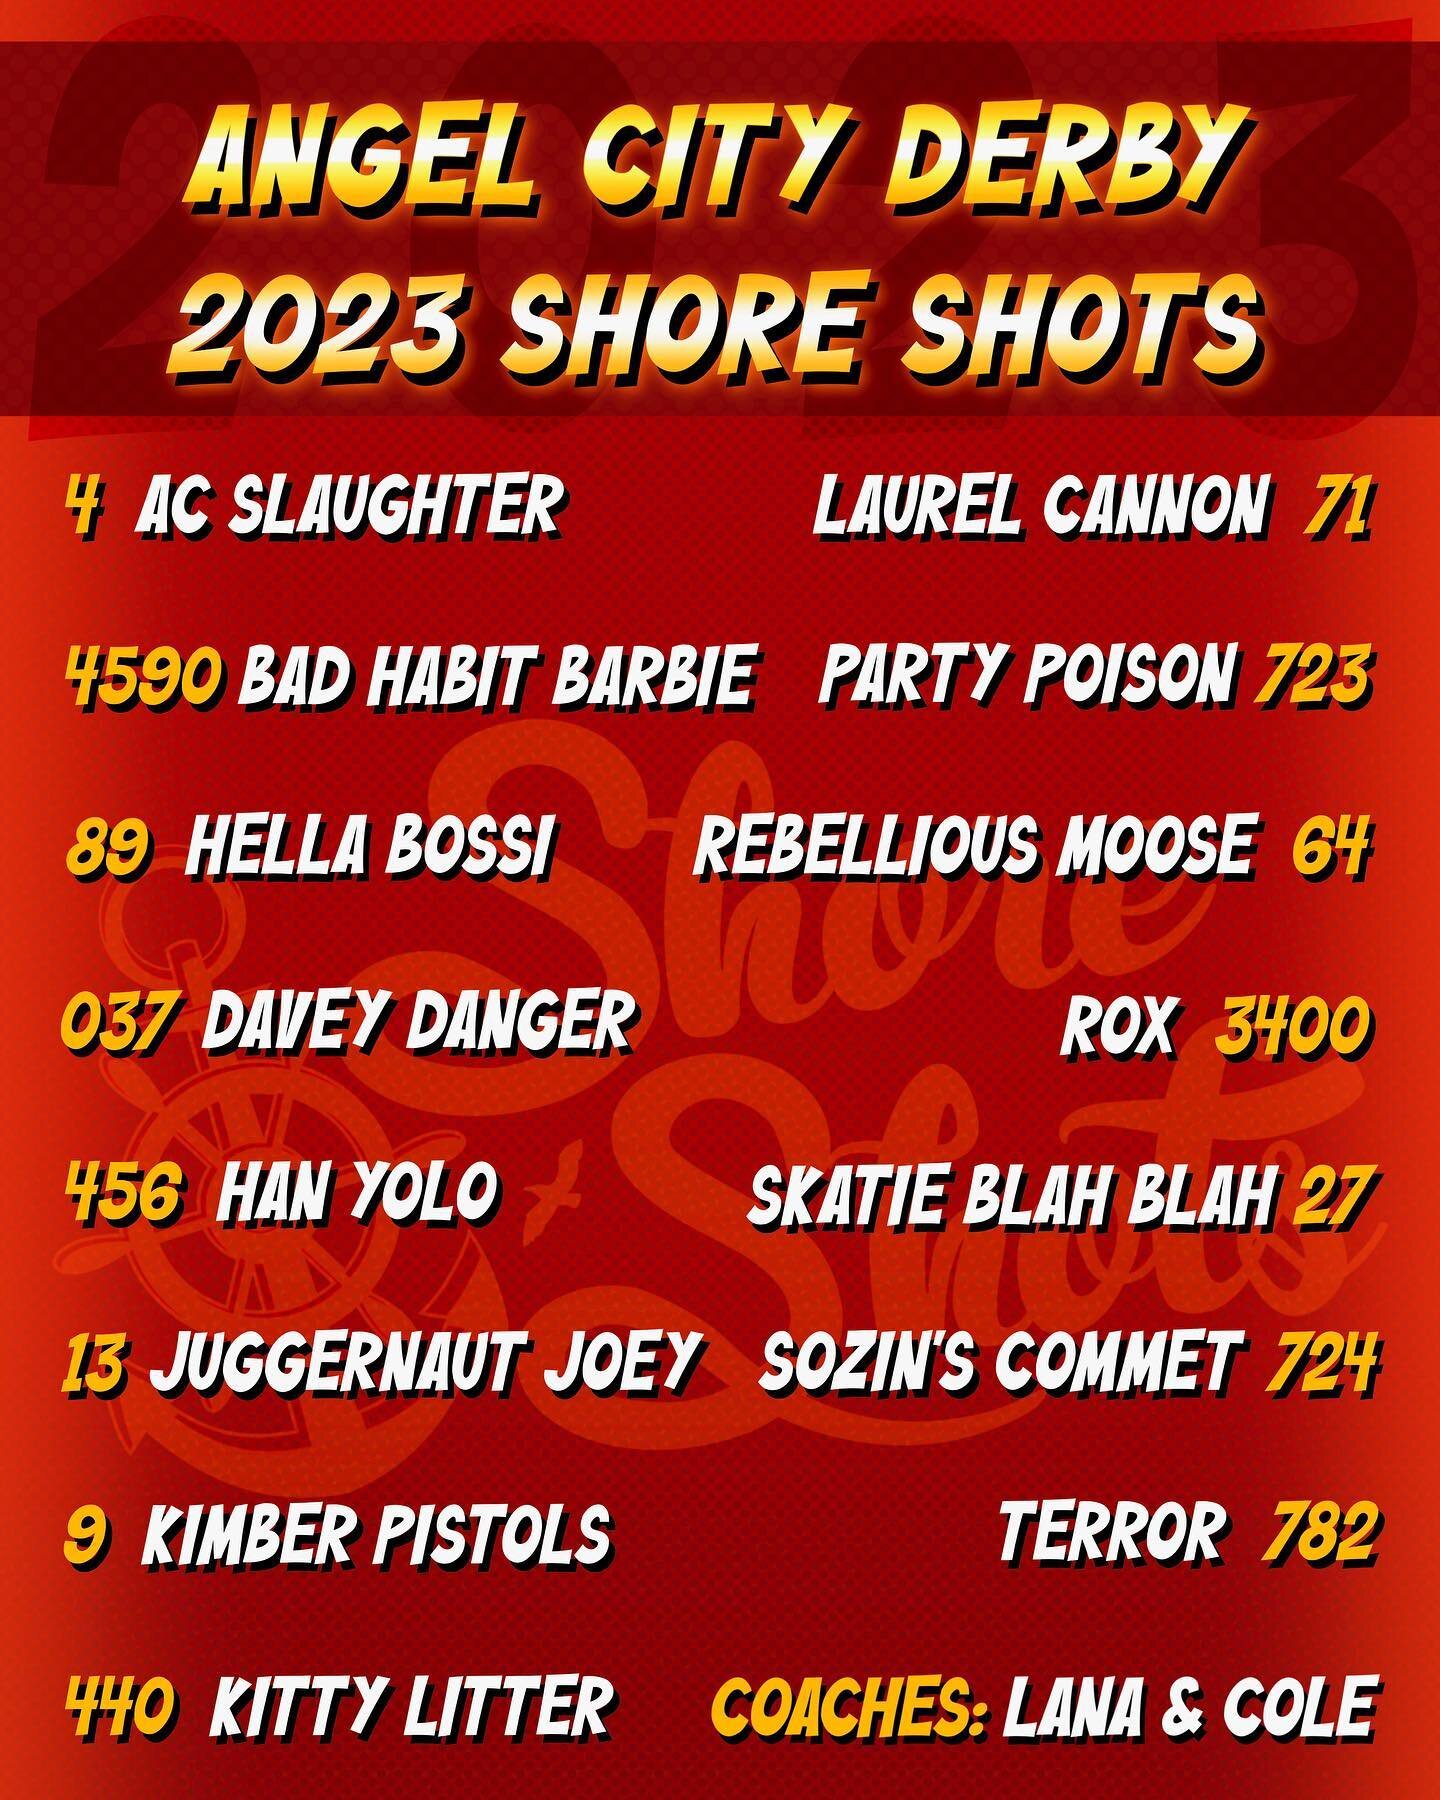 ⚓️AHOY⚓️ Meet your 2023 Shore Shots! These salty sailors rule the high seas and are comin&rsquo; fer yer booty! 🏴&zwj;☠️🚢🚢🚢 #allhandsondeck⚓️ #anchorsaweigh #poppop #rollerderby